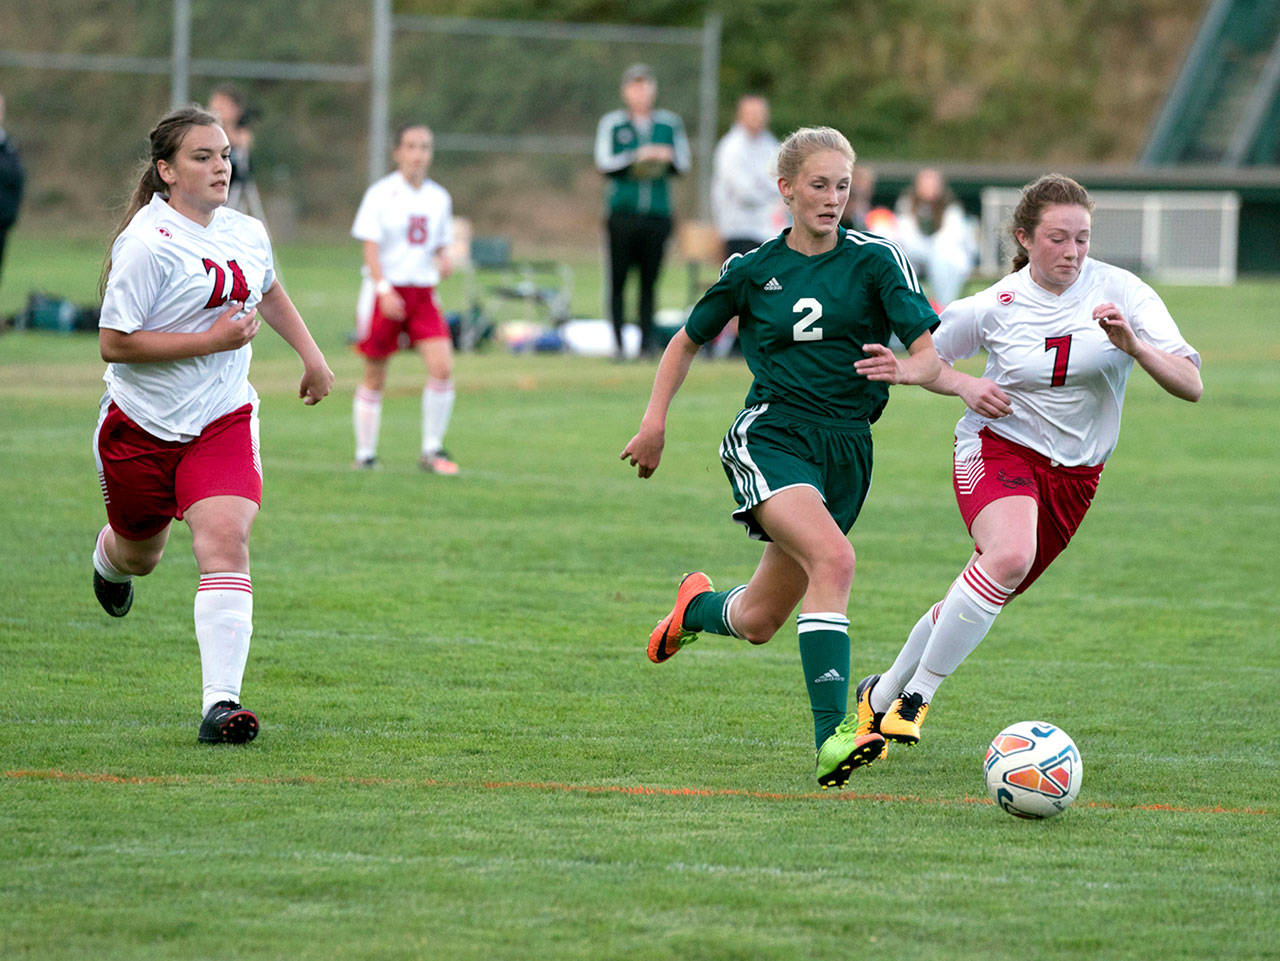 Port Angeles’ Millie Long, (2), races Port Townsend’s Nylah Garling, (7), for control of the ball as Margeaux Manuel, (24), assists in the Roughriders’ 6-0 win Tuesday. (Steve Mullensky/for Peninsula Daily News)